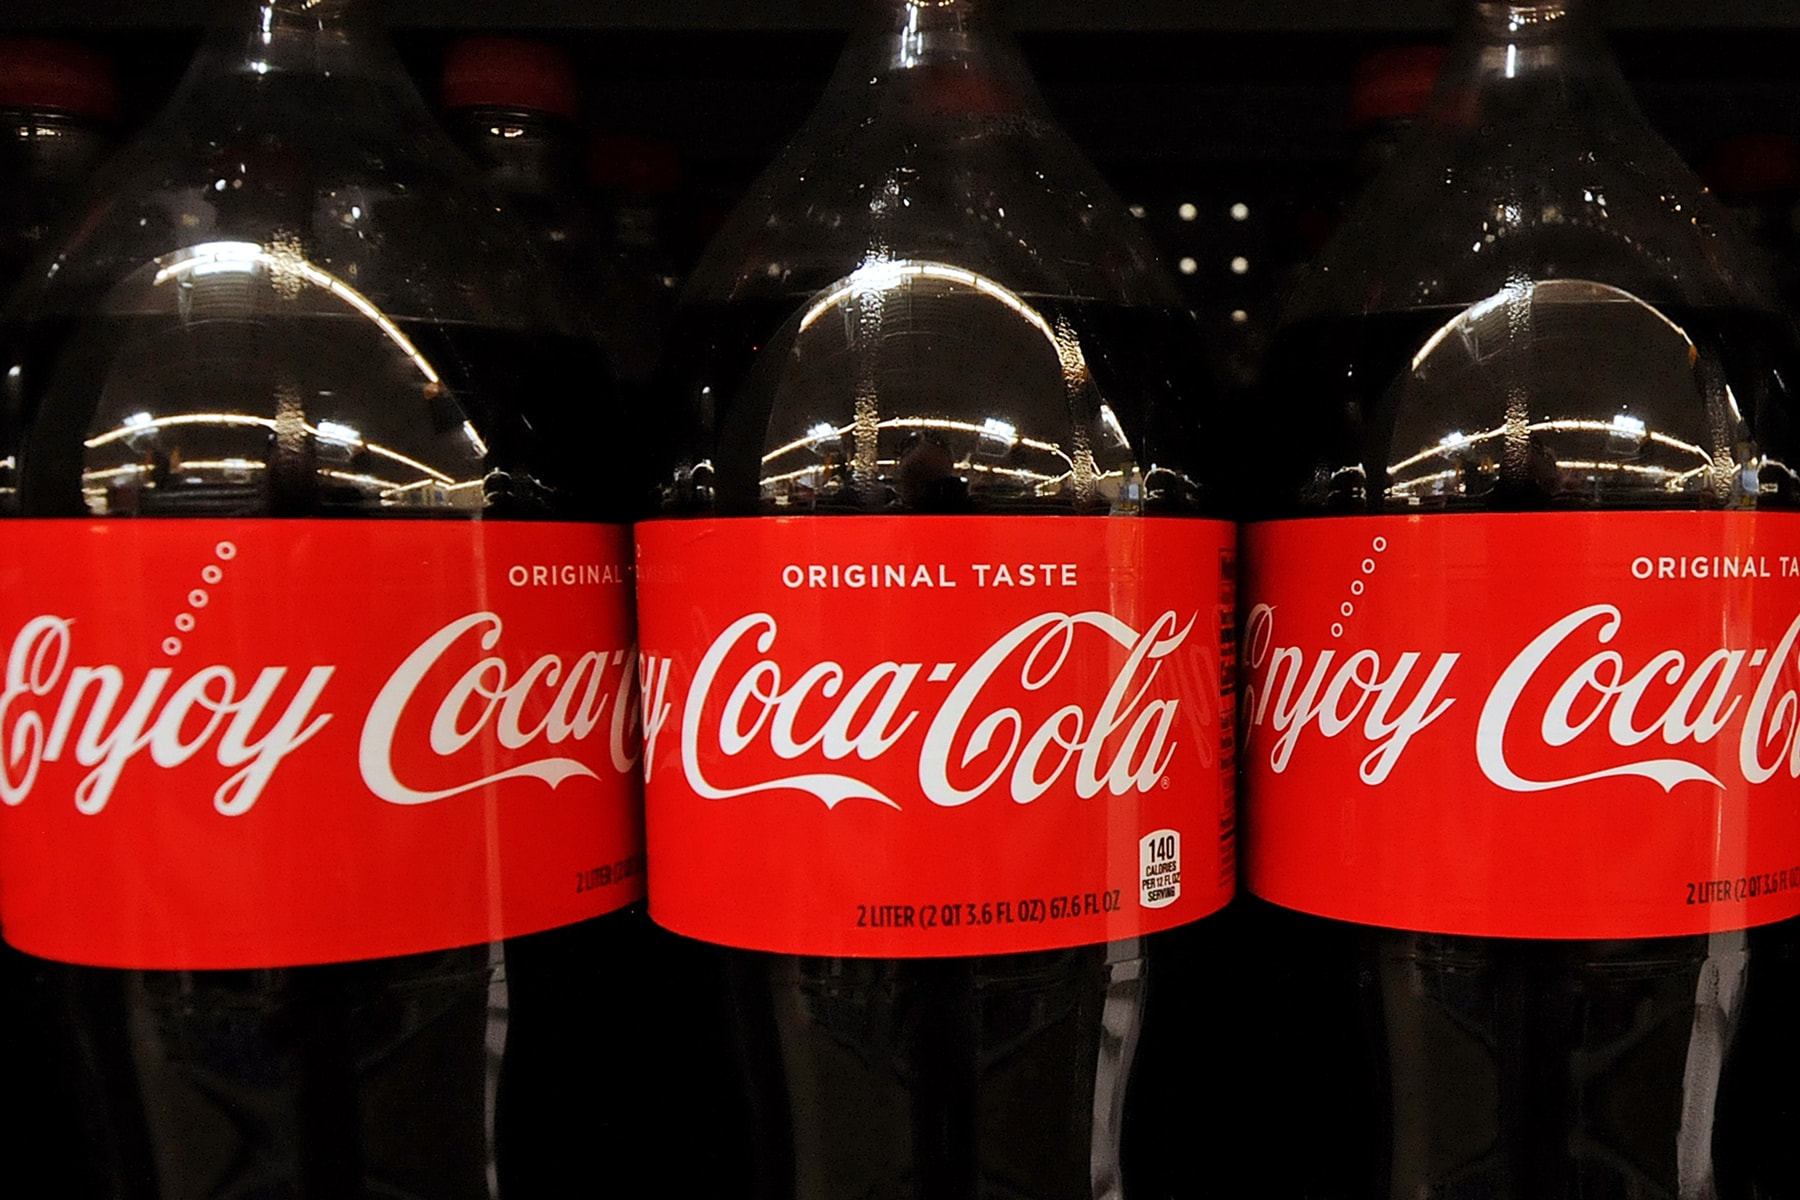 Cinnamon-Flavored Coca-Cola Is Heading to the U.S. united states release information christmas coke soft drinks soda